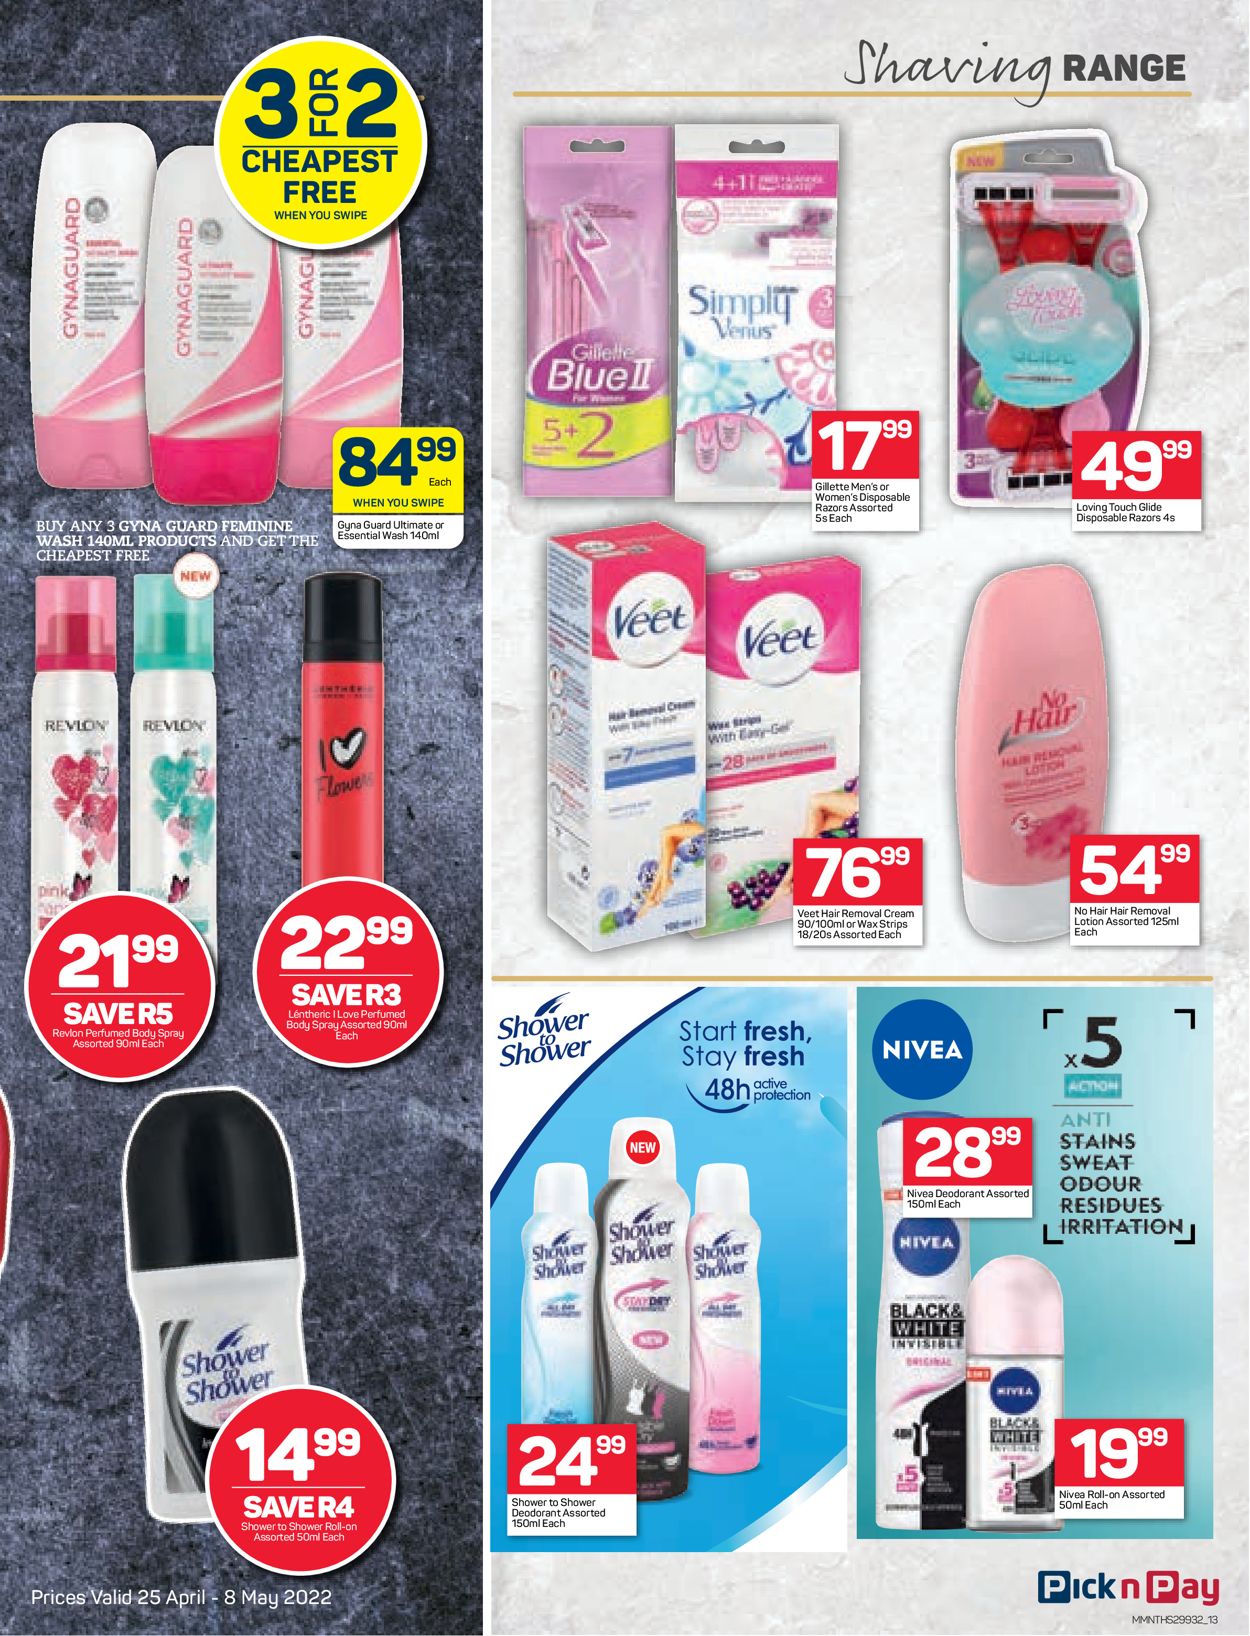 Pick n Pay Catalogue - 2022/04/25-2022/05/08 (Page 13)